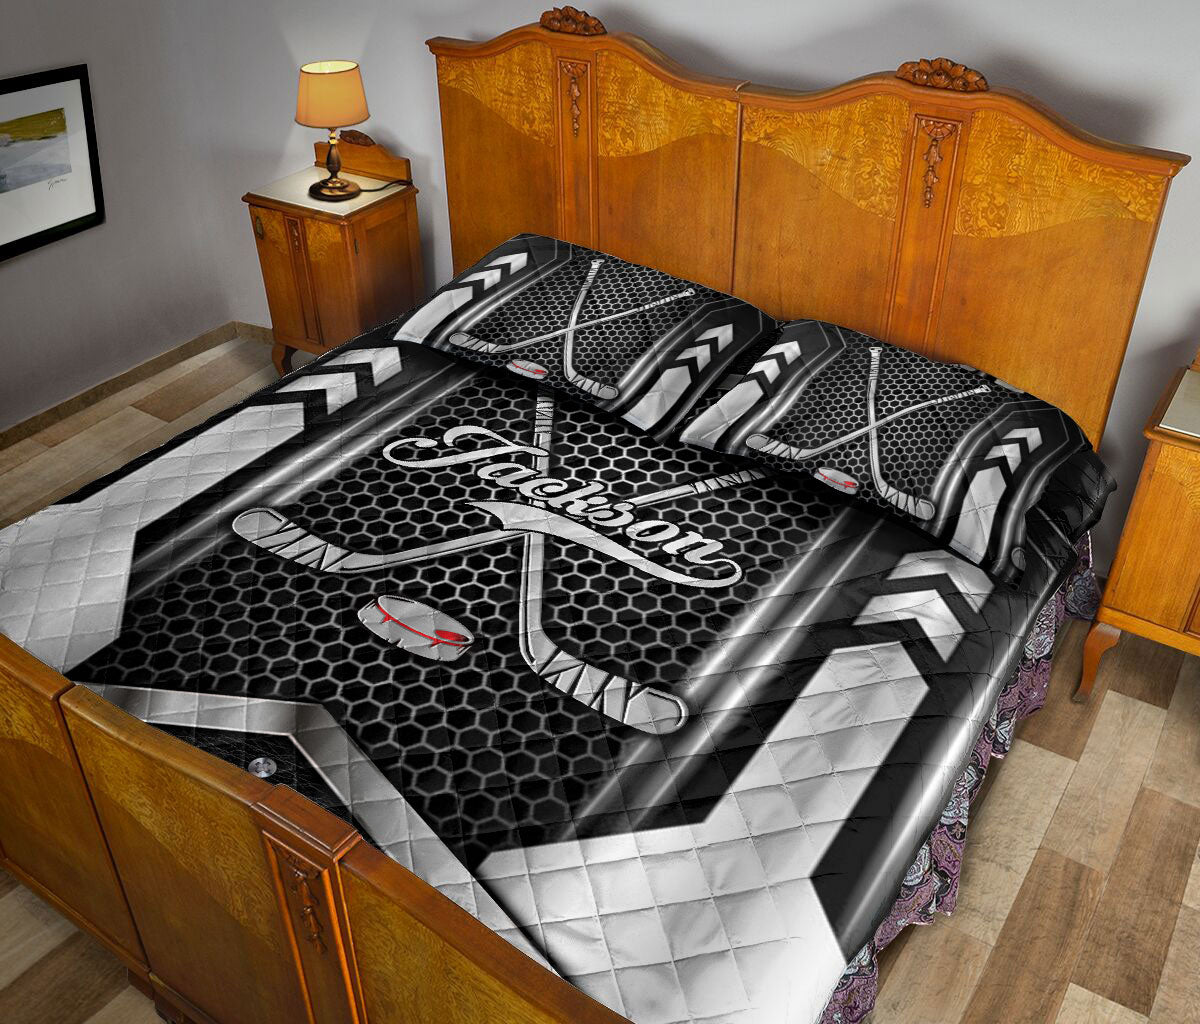 Ohaprints-Quilt-Bed-Set-Pillowcase-Hockey-Ball-Gift-For-Sport-Lover-B&W-Pattern-Custom-Personalized-Name-Blanket-Bedspread-Bedding-690-Queen (80'' x 90'')